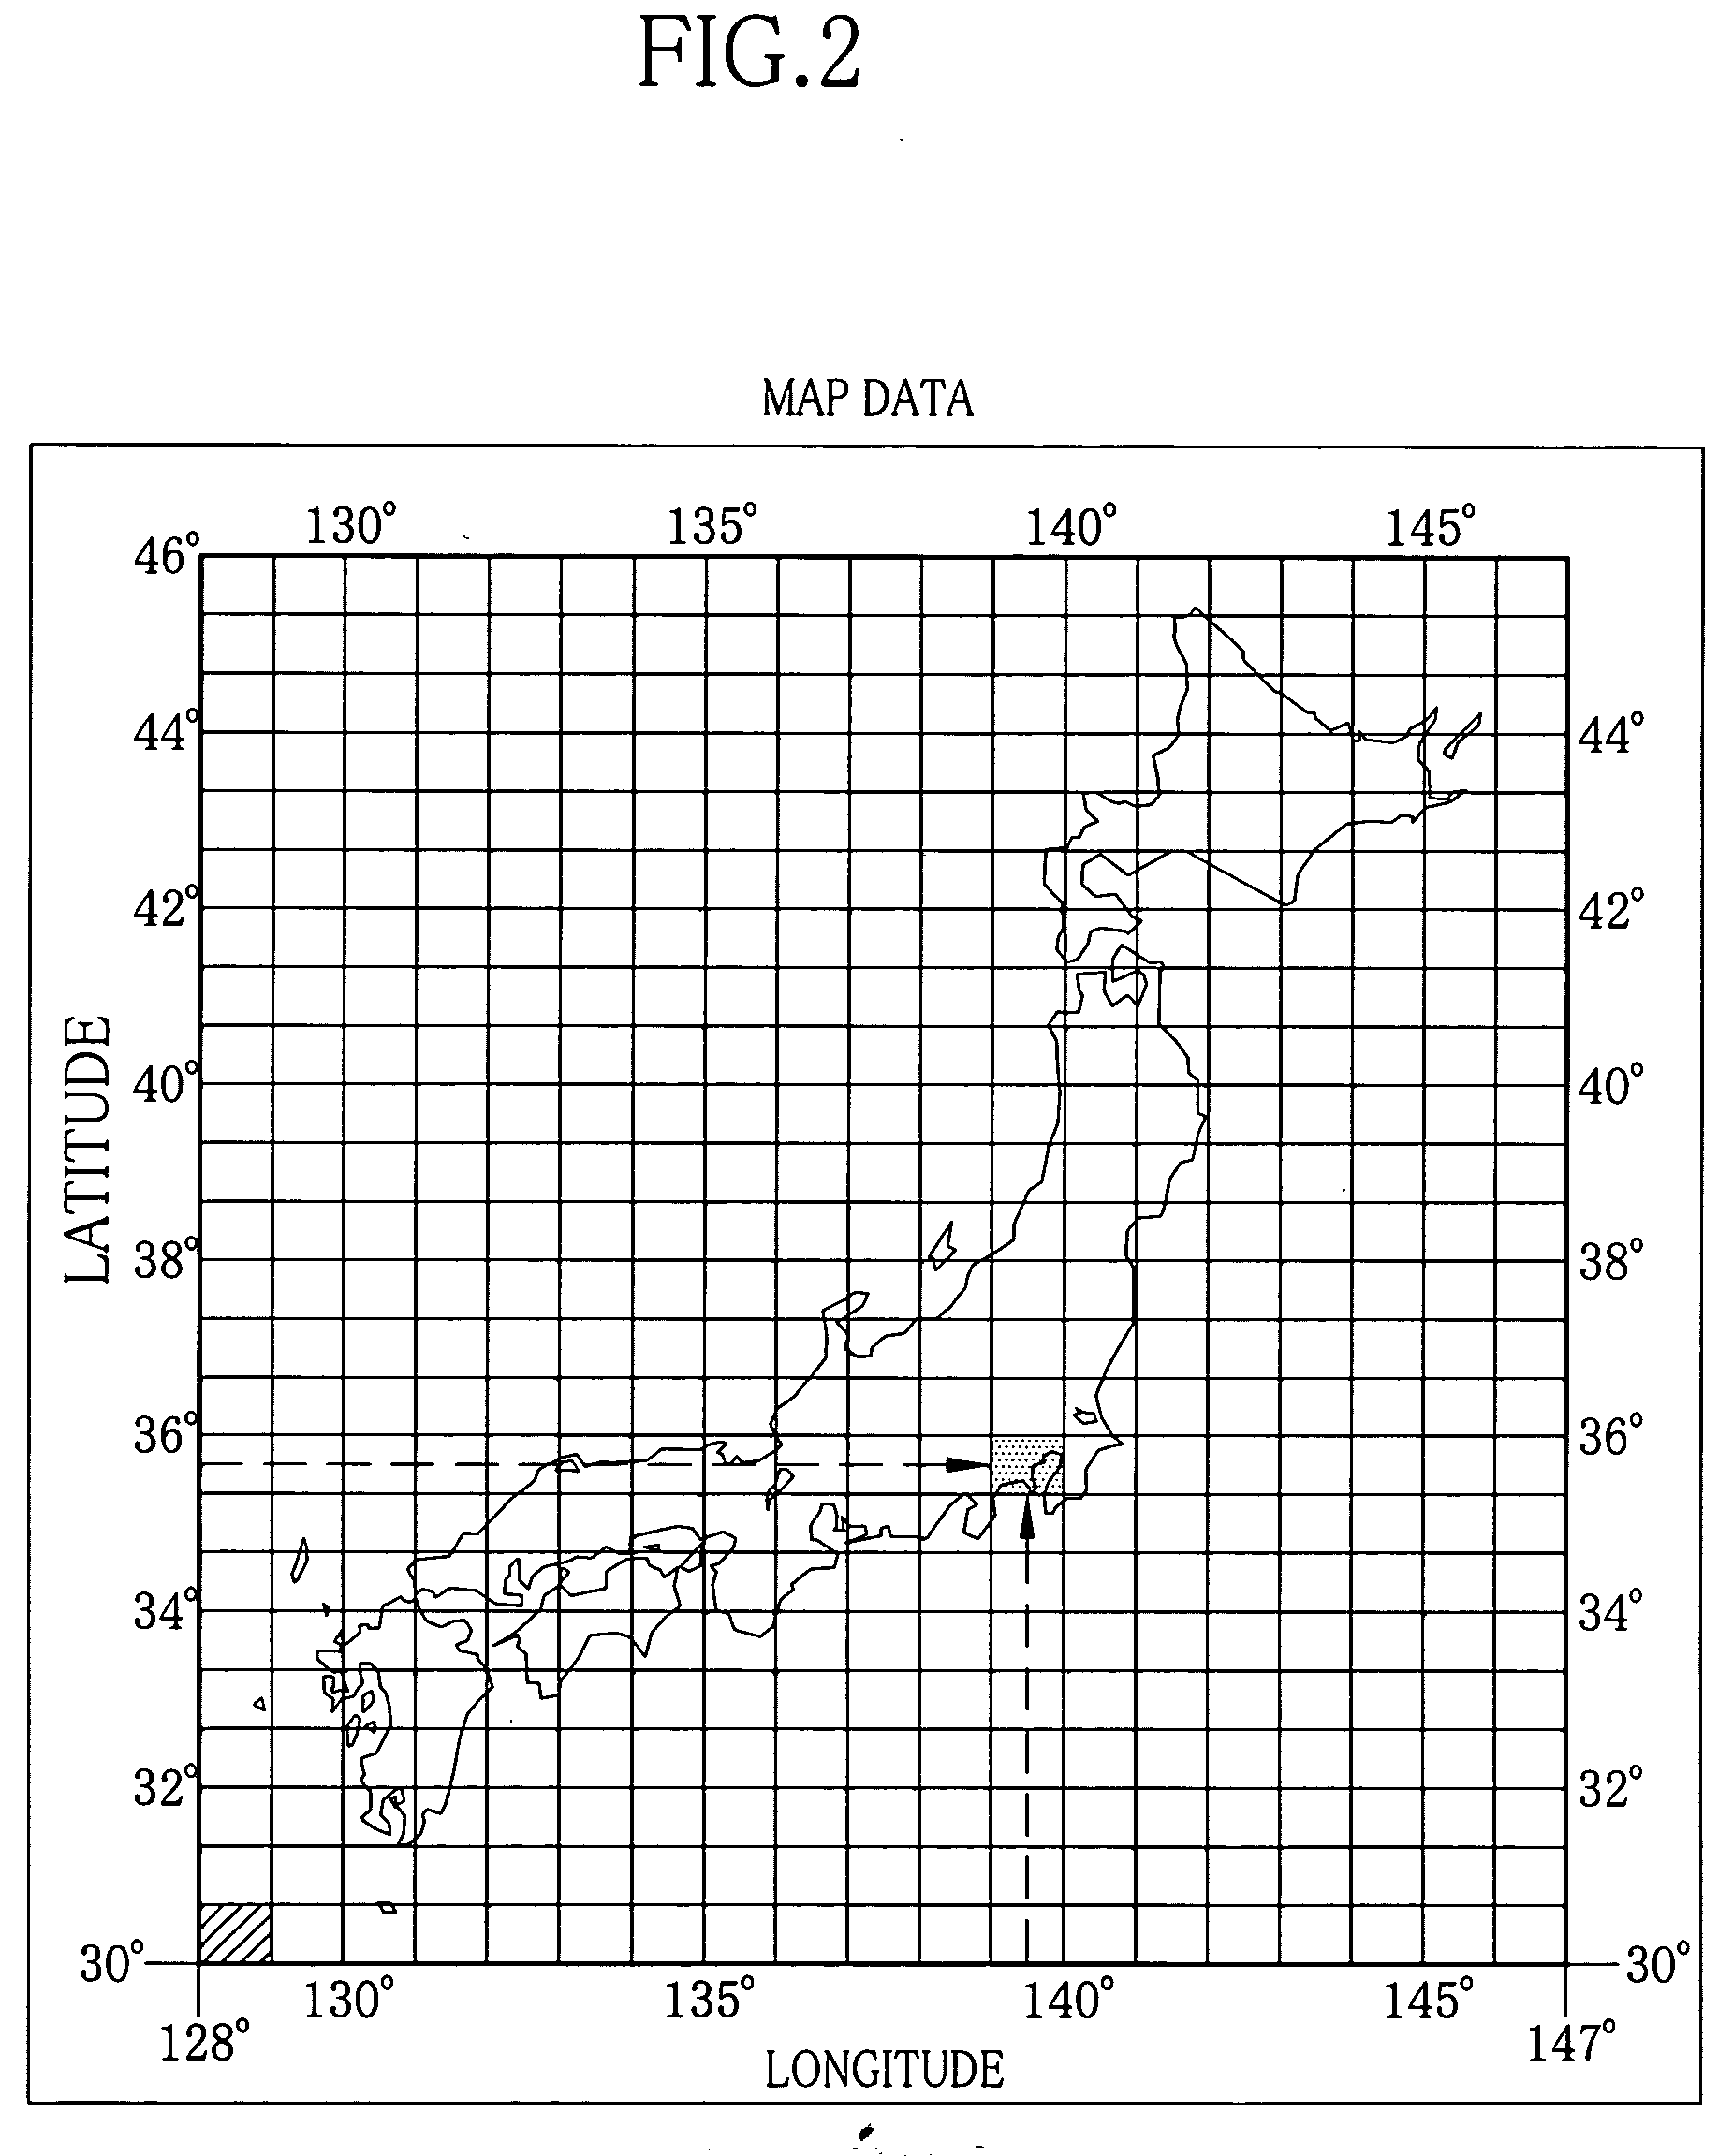 Landmark search system for digital camera, map data, and method of sorting image data